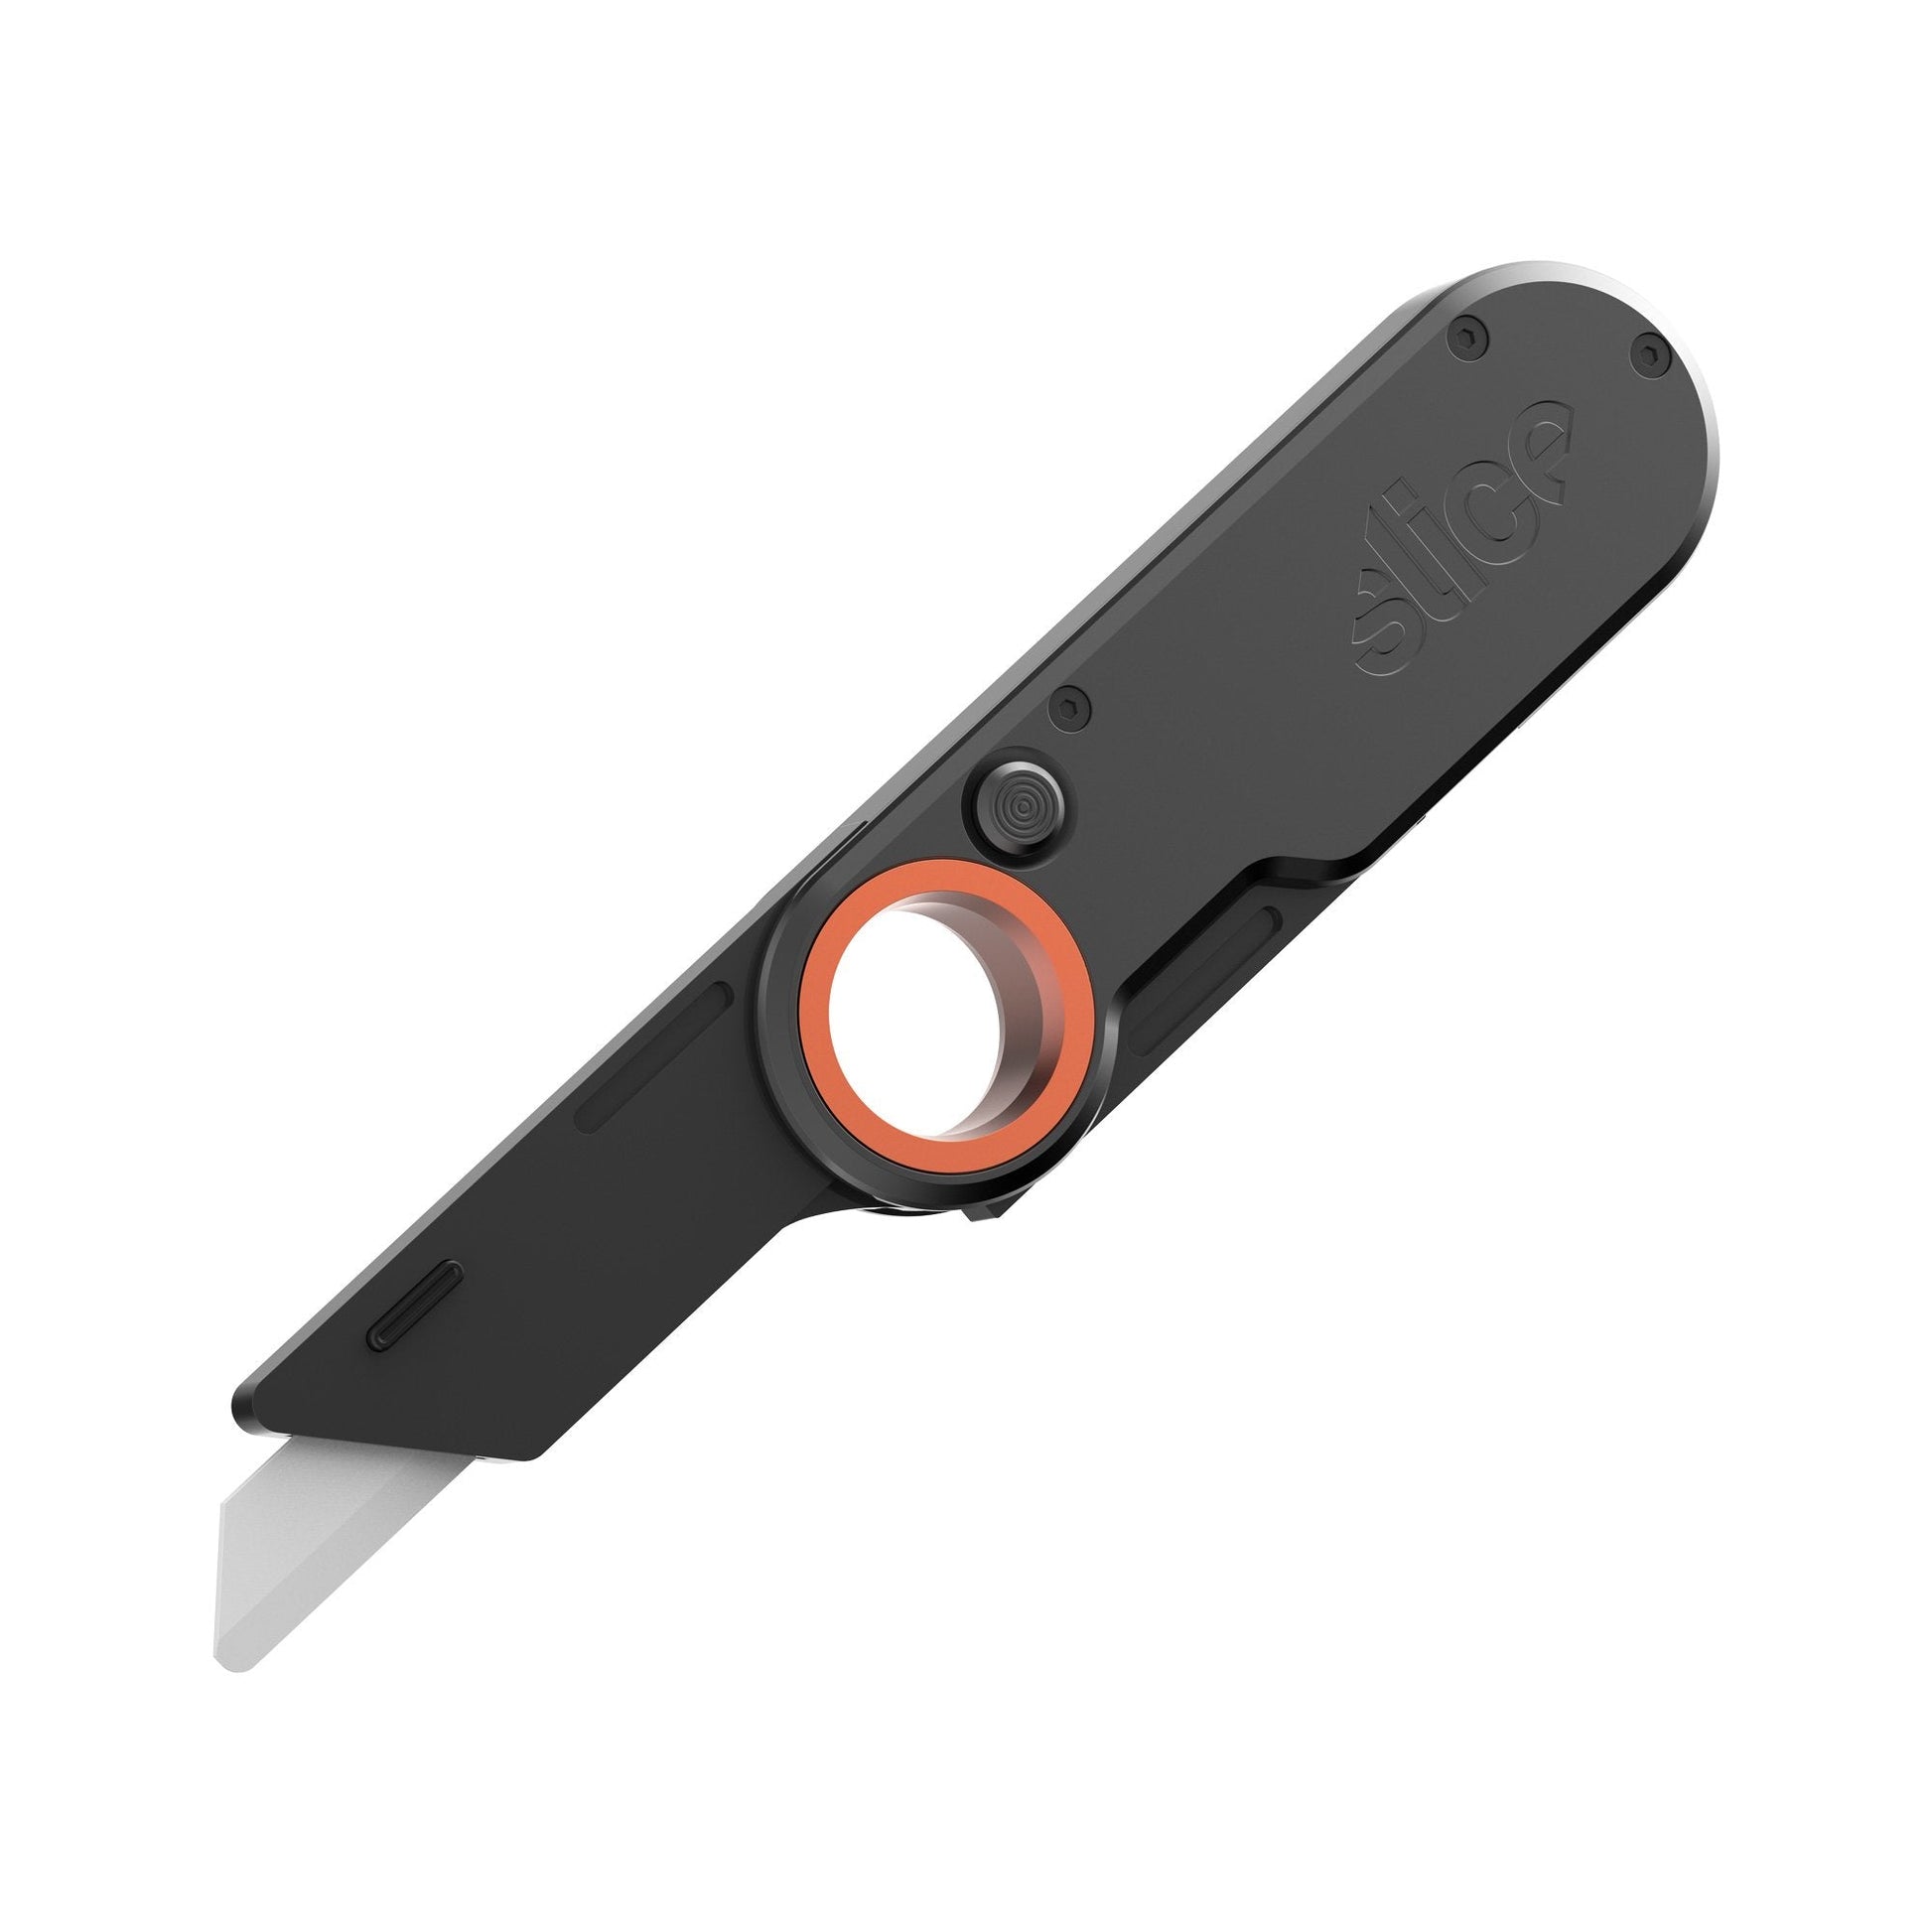 The Slice® 10562 Folding Utility Knife with metal handle and finger-friendly® safety blade.